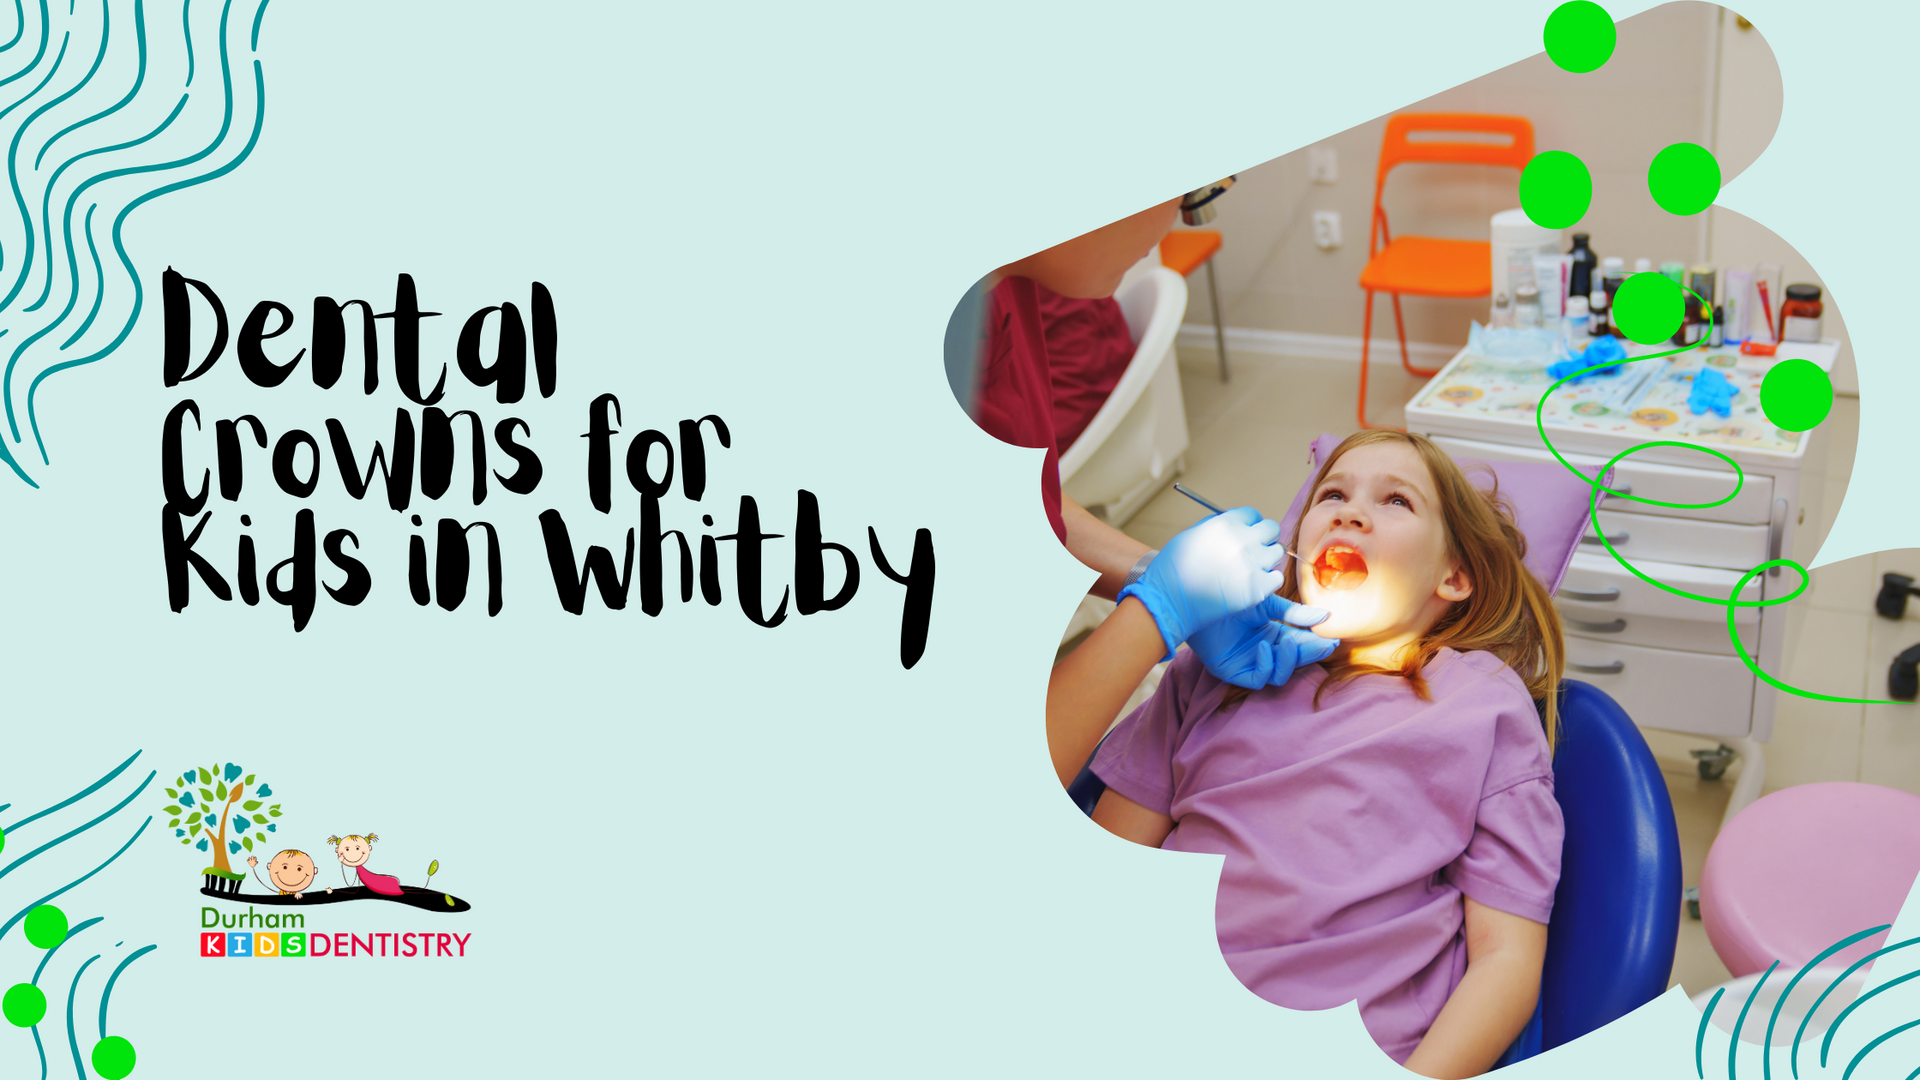 a poster for dental crowns for kids in whitby